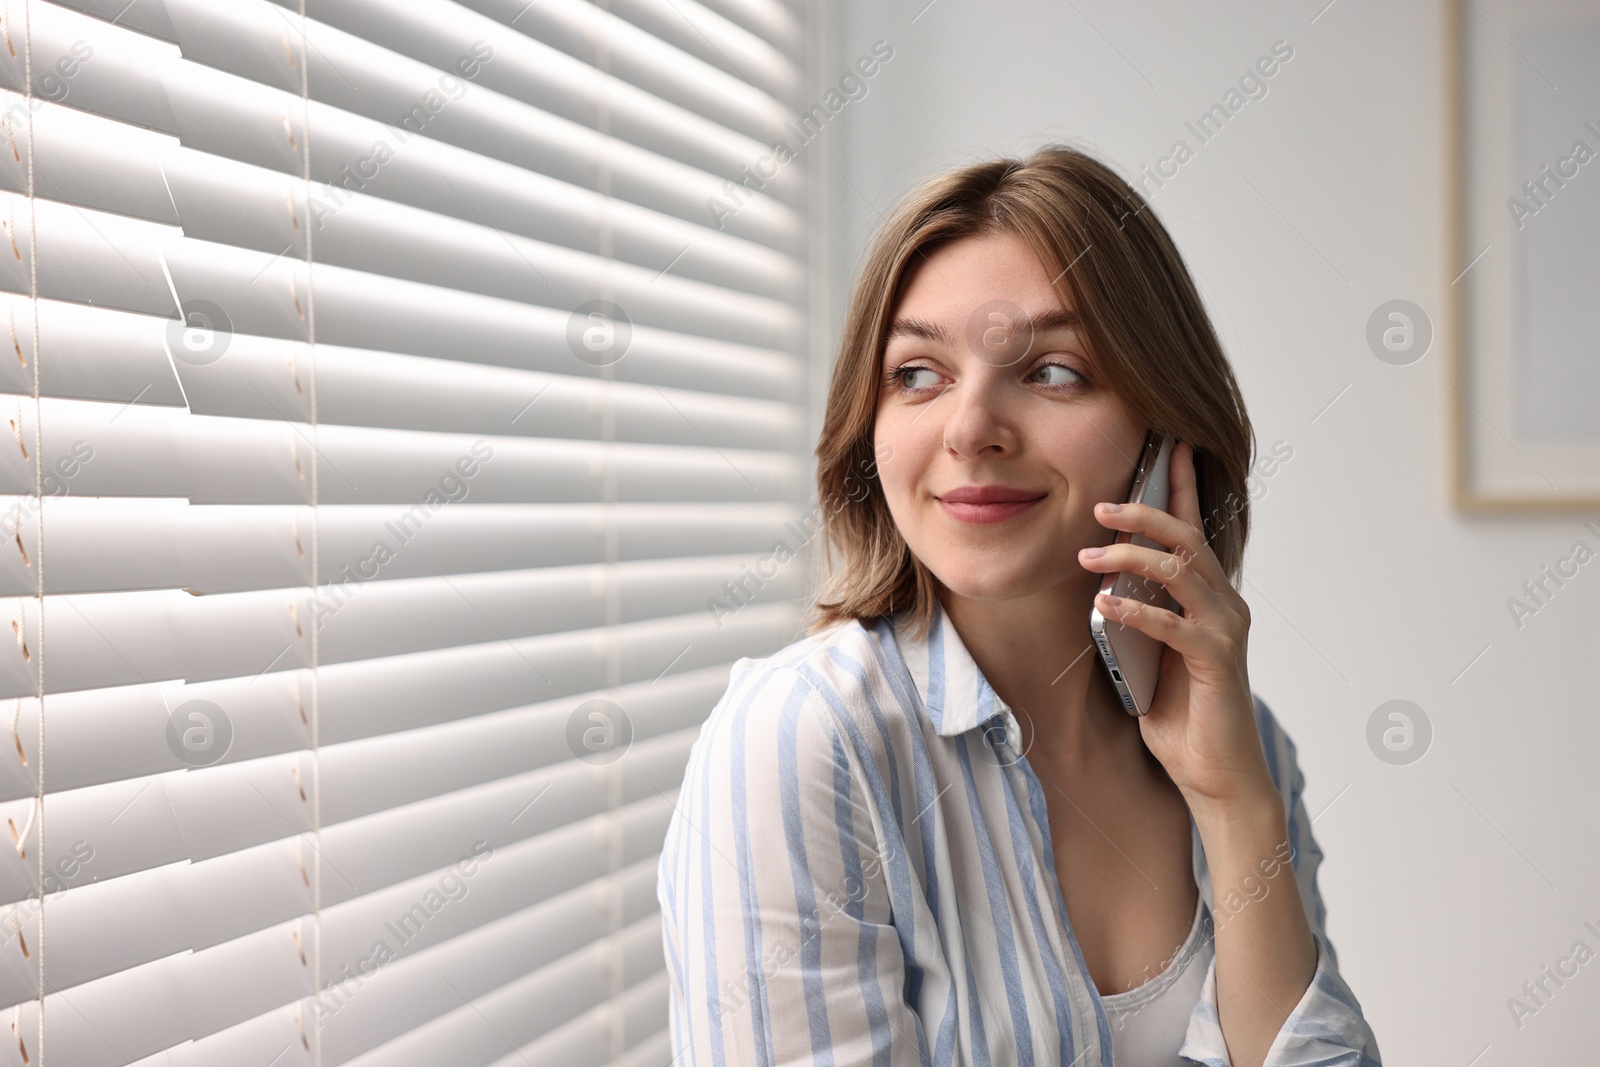 Photo of Woman talking on phone near window blinds at home, space for text